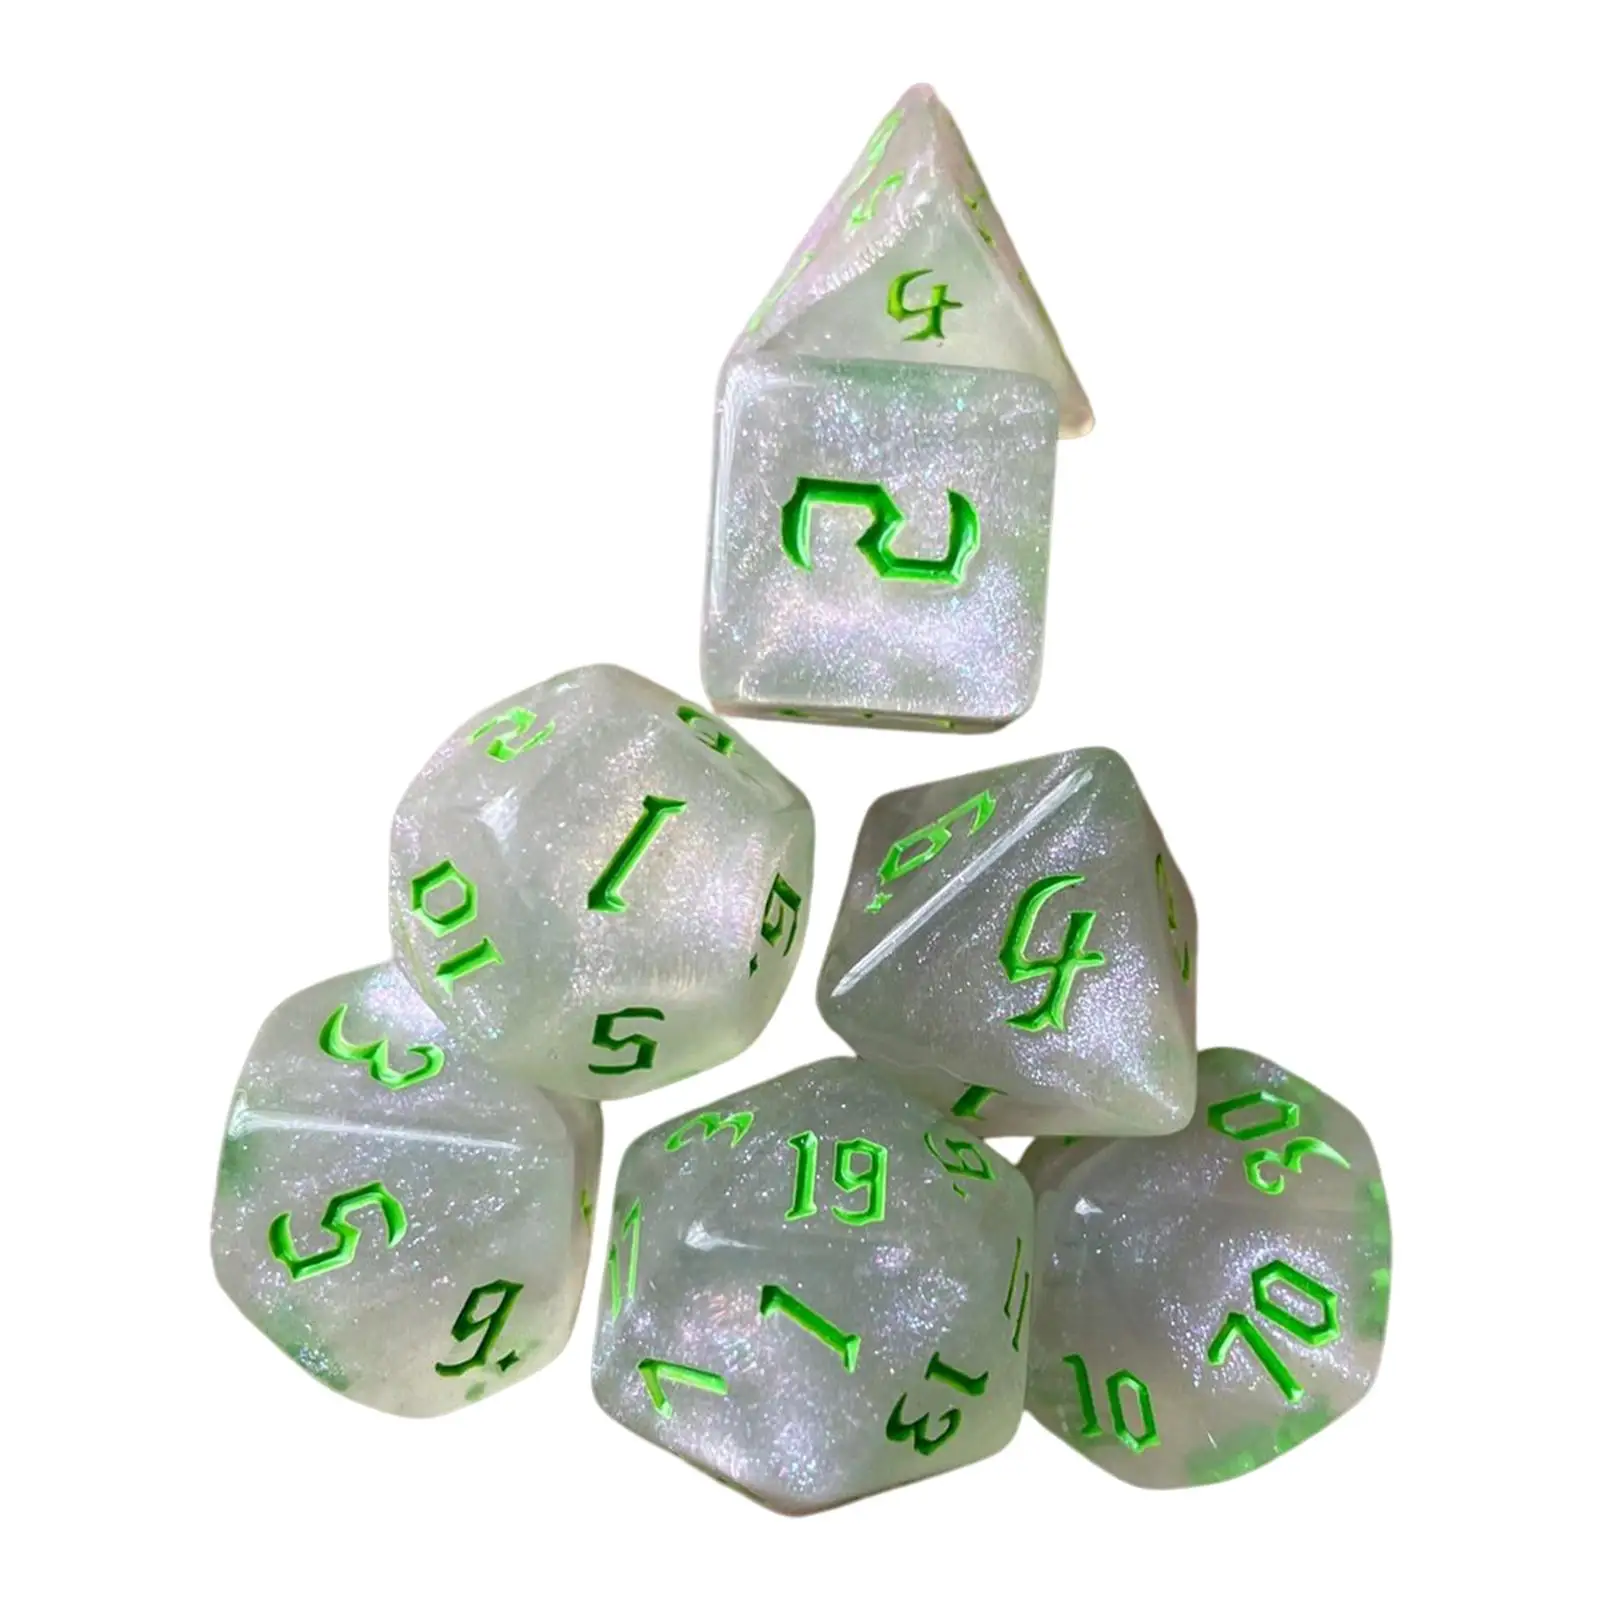 Engraved Polyhedral Dices Set Entertainment Toy 7Pcs for Board Game Props